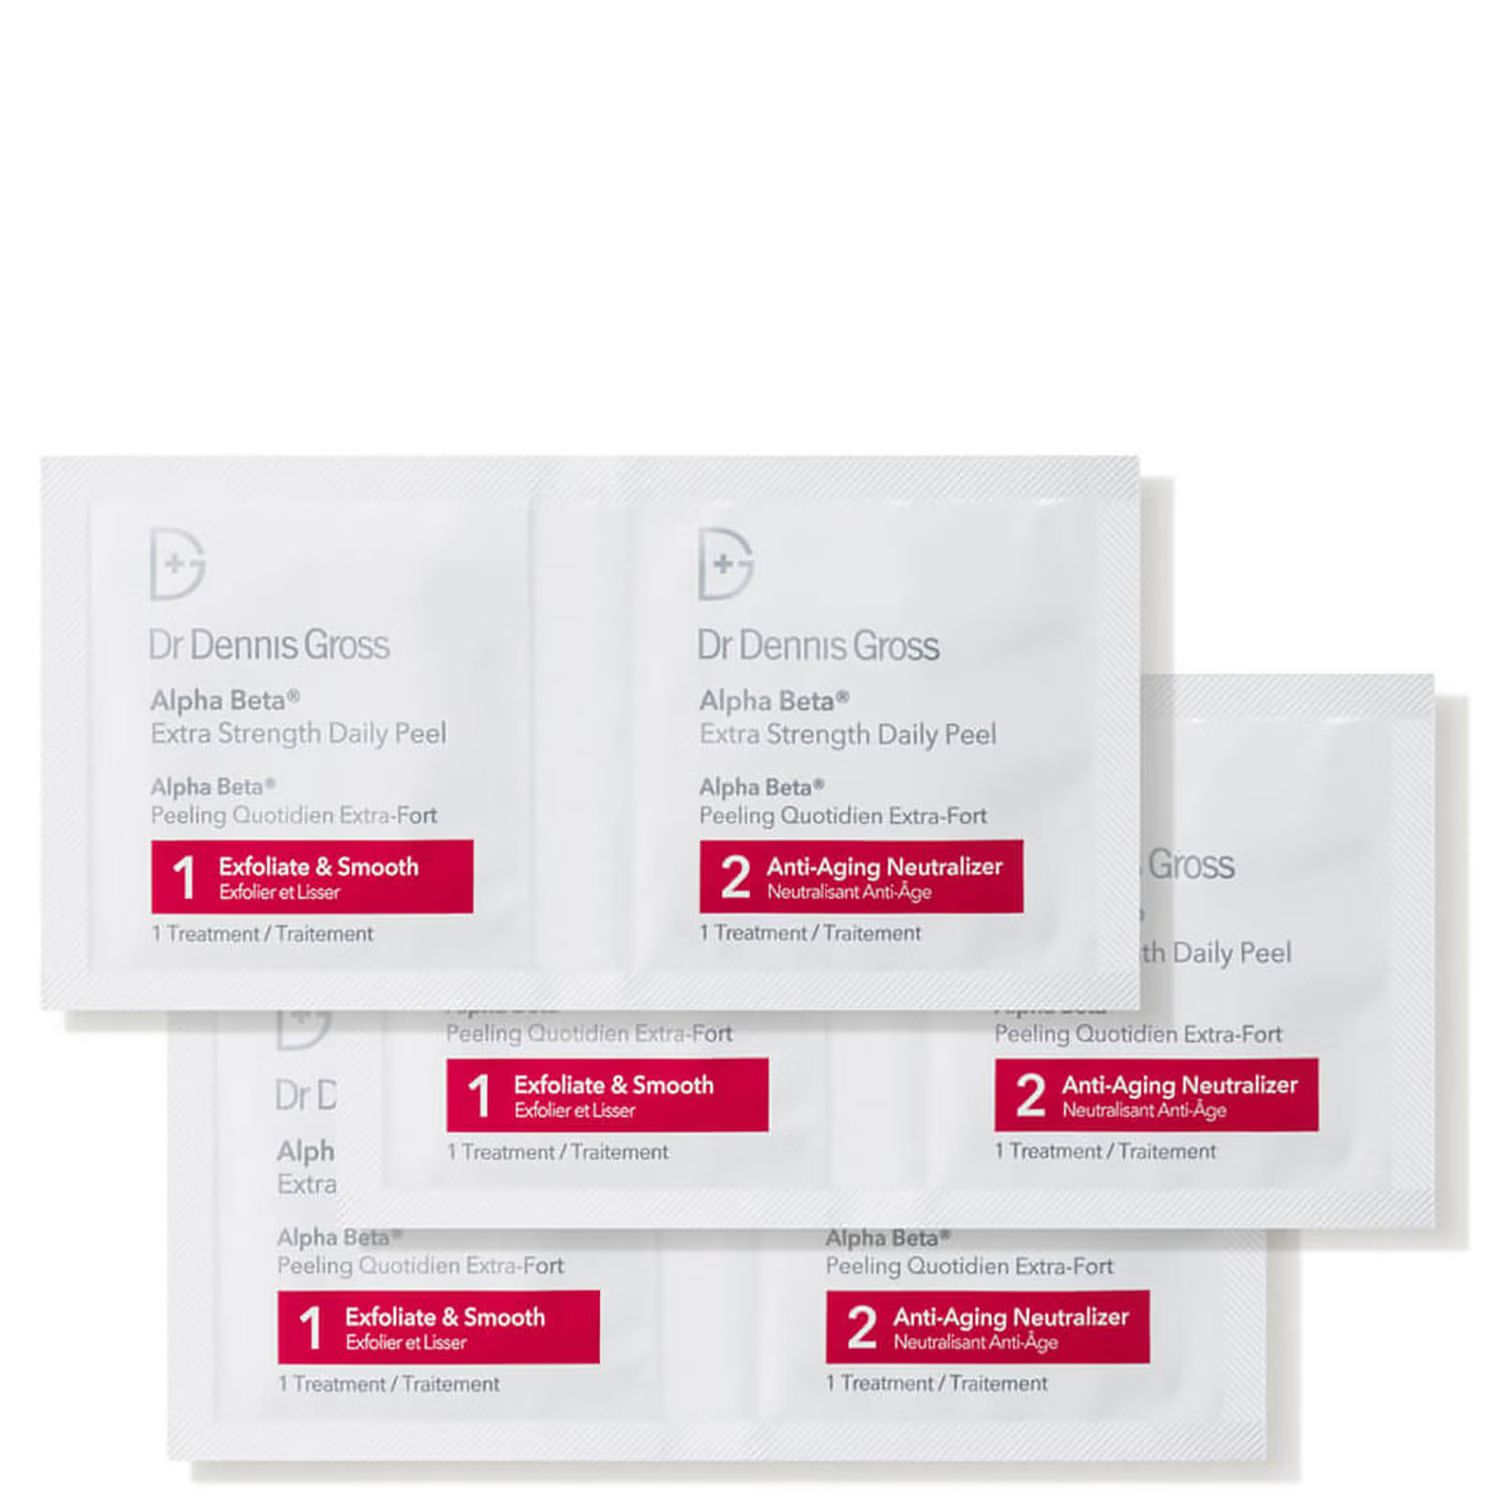 Dr Dennis Gross Alpha Beta Extra Strength Daily Peel - Packettes (30 count) | Dermstore